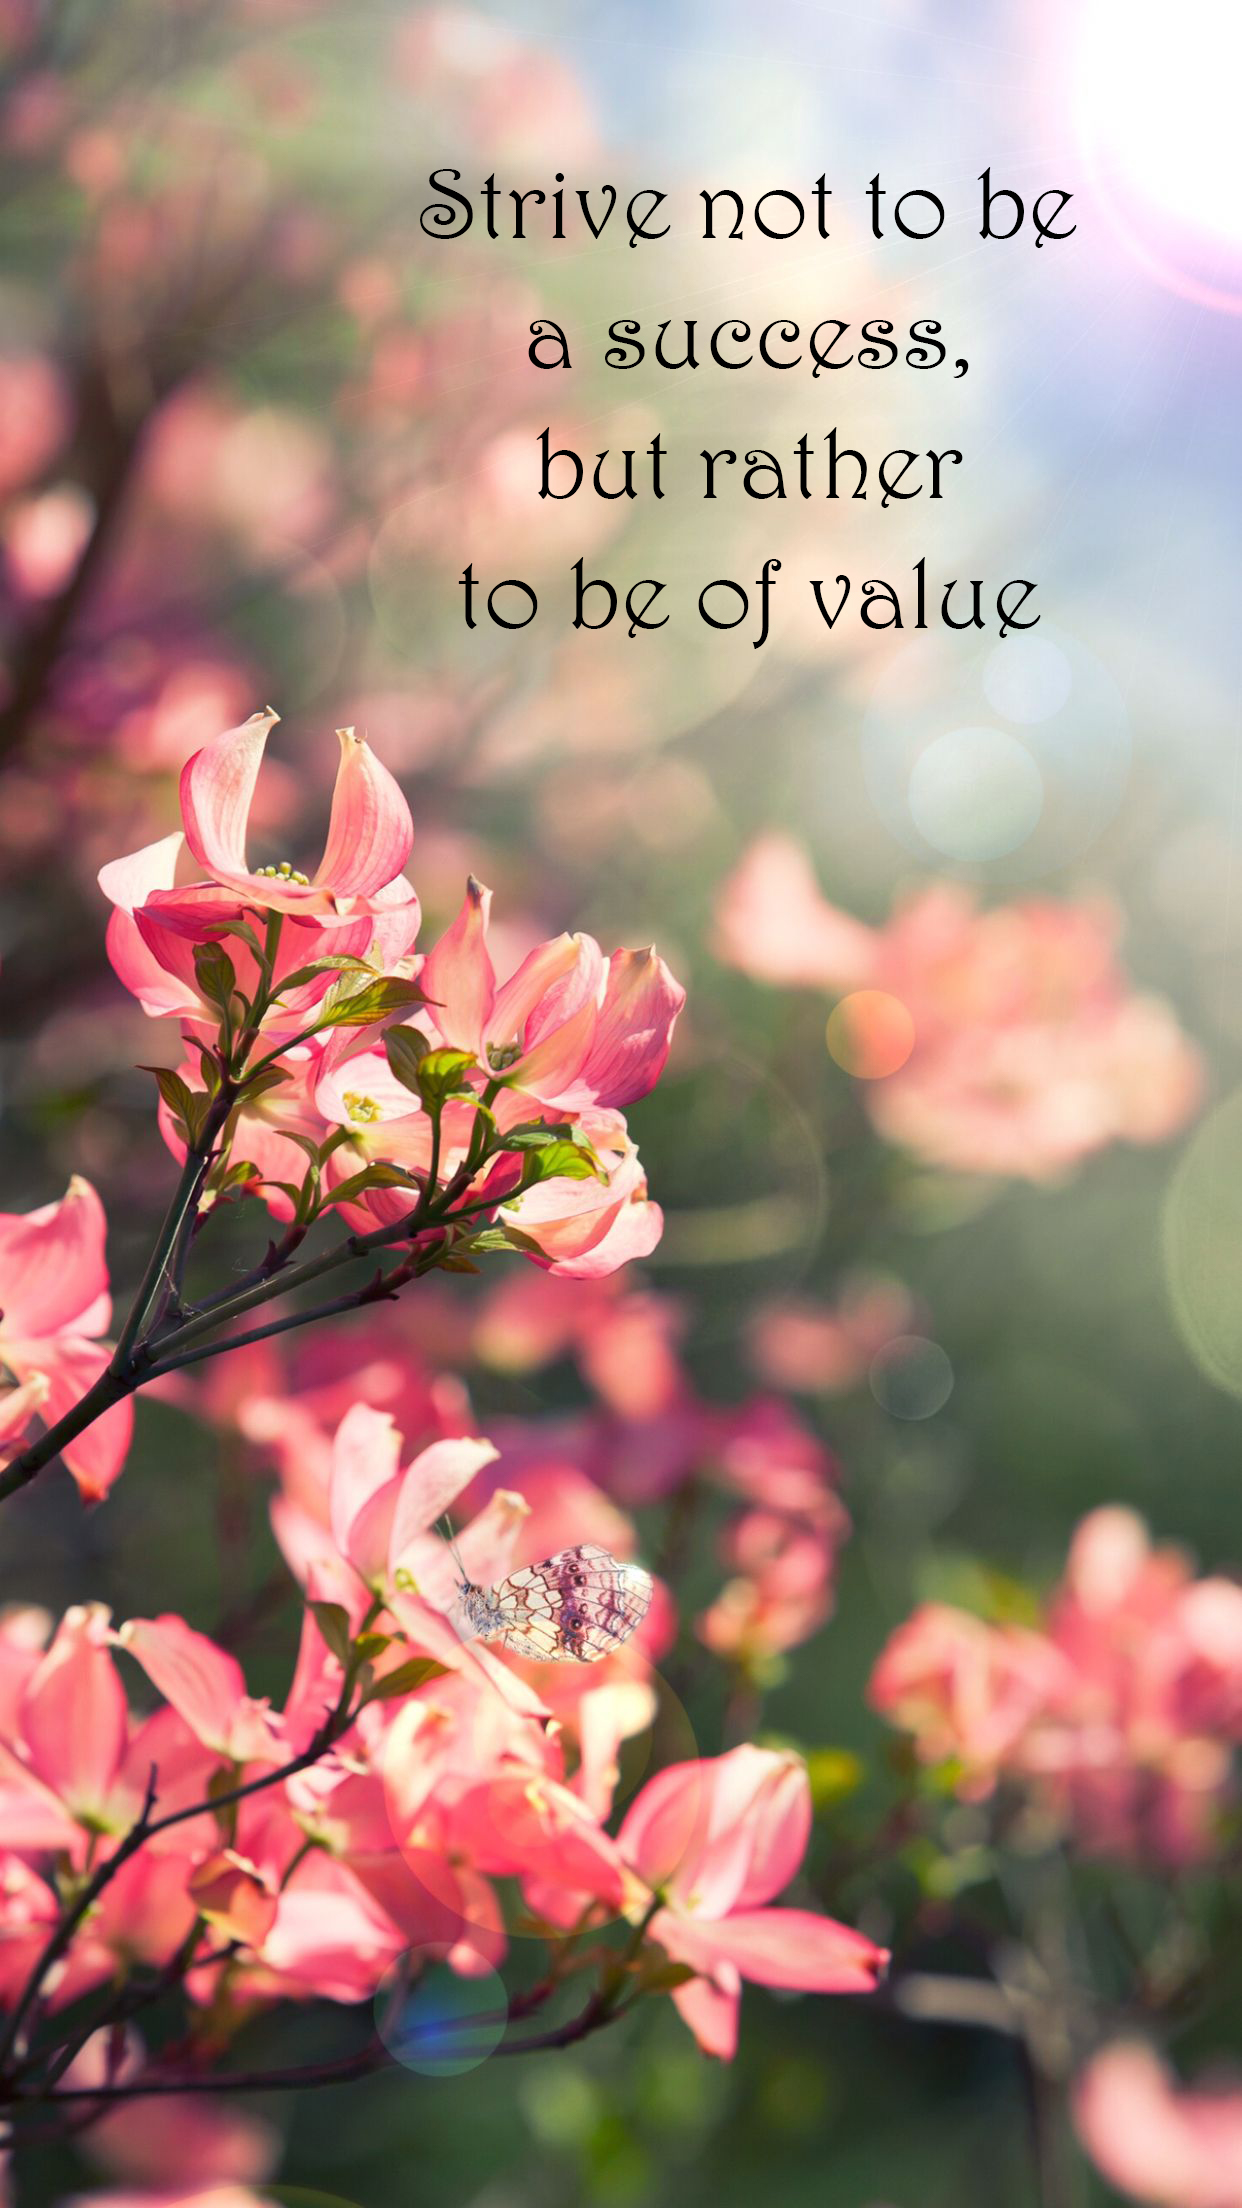 Strive not to be a success, but rather to be of value